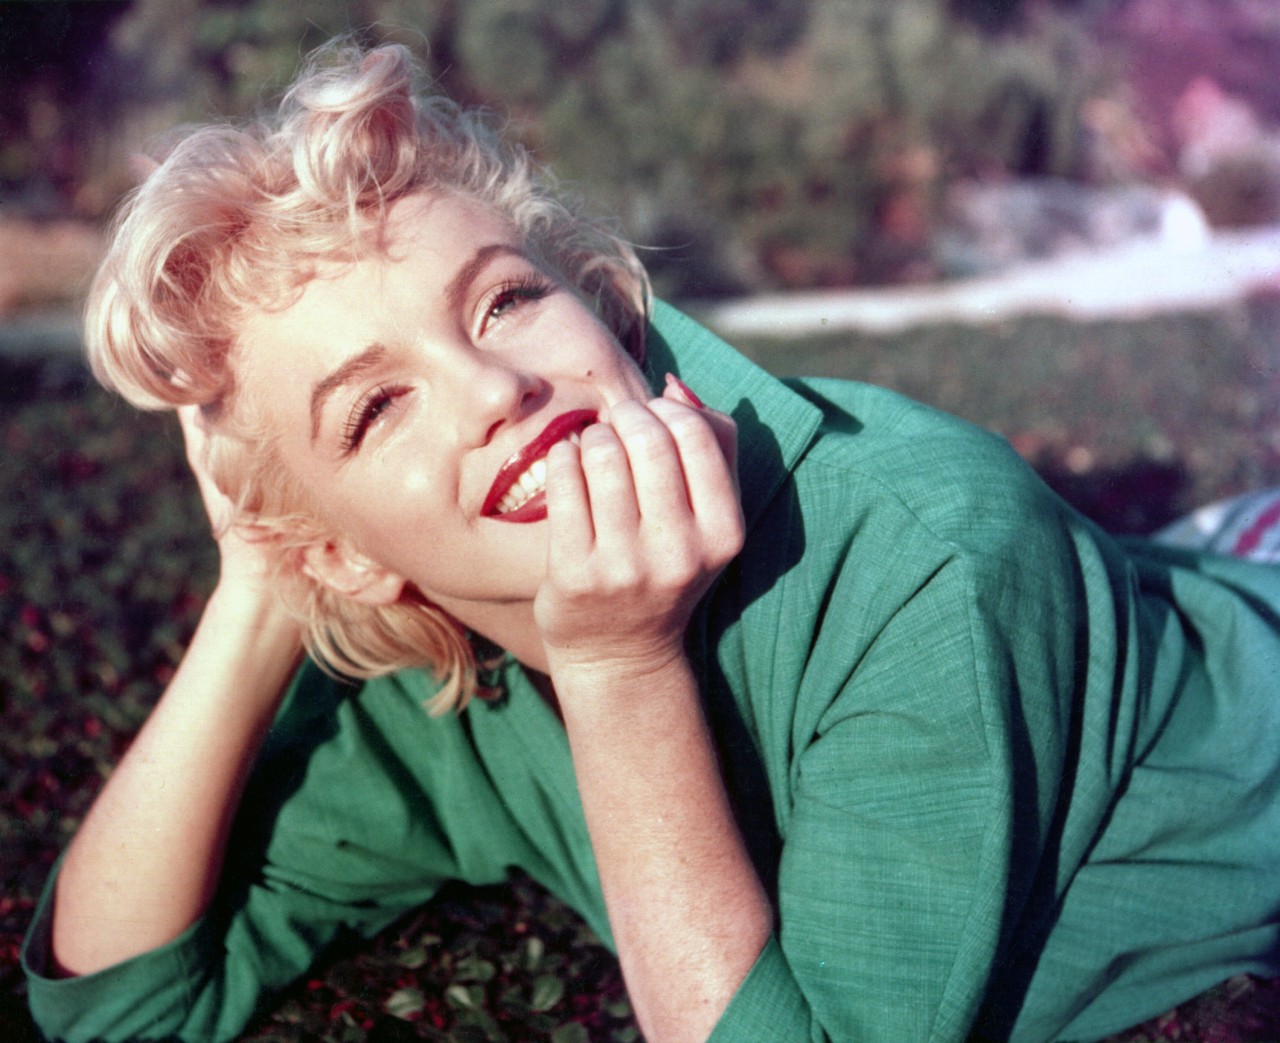 Marilyn Monroe | Baron/Hulton Archive/Getty Images